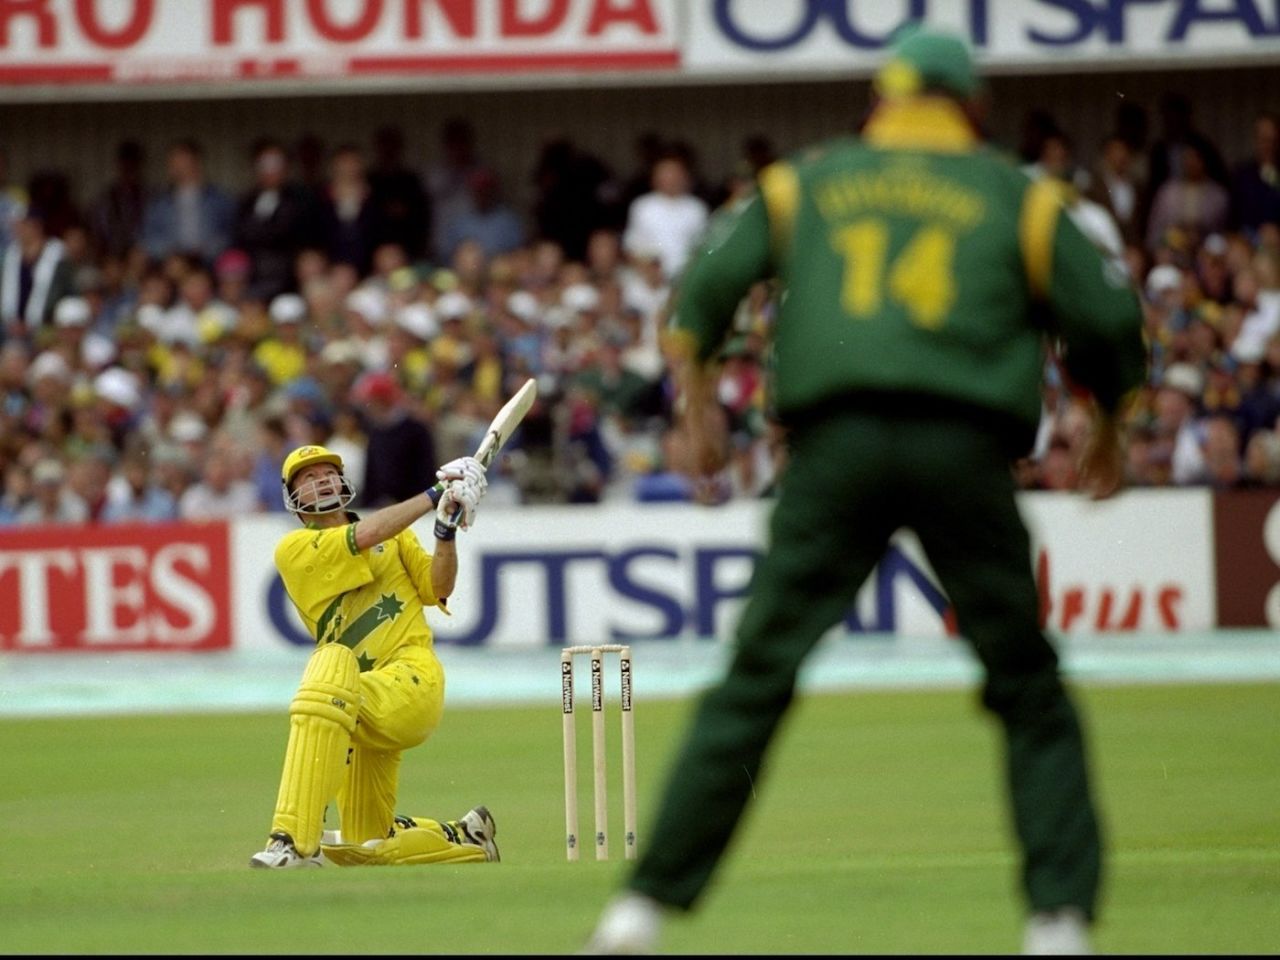 Steve Waugh smashes a boundary as Australia recover against South Africa, Headingley, Leeds, England, World Cup Super Sixes, June 13, 1999